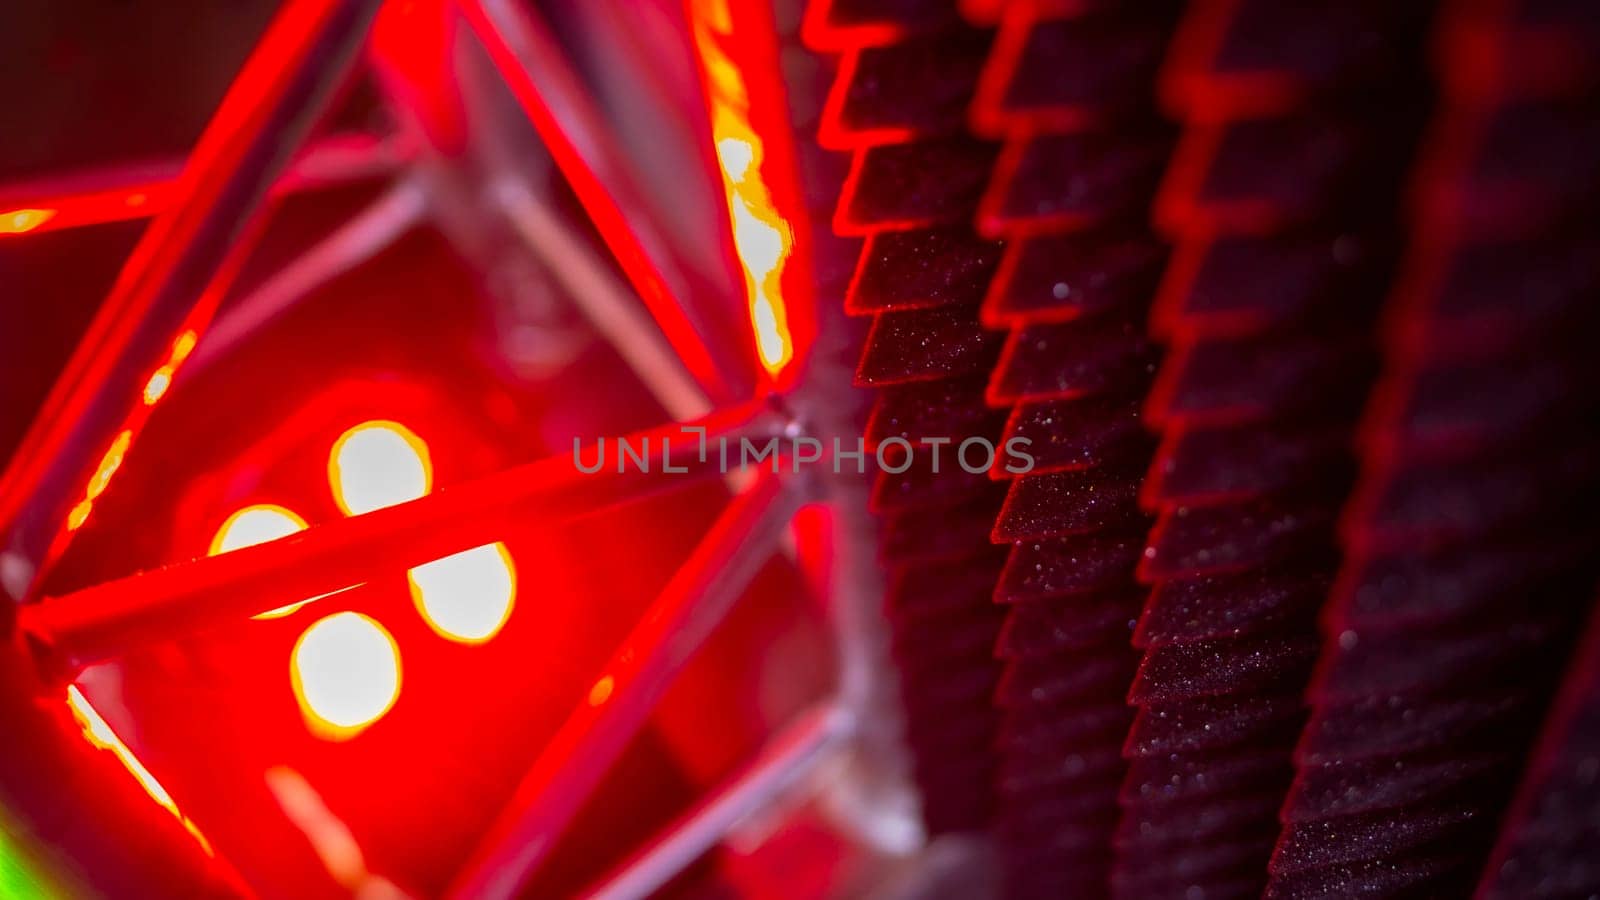 aluminum truss for lighting equipment illuminated with red light. color by lempro